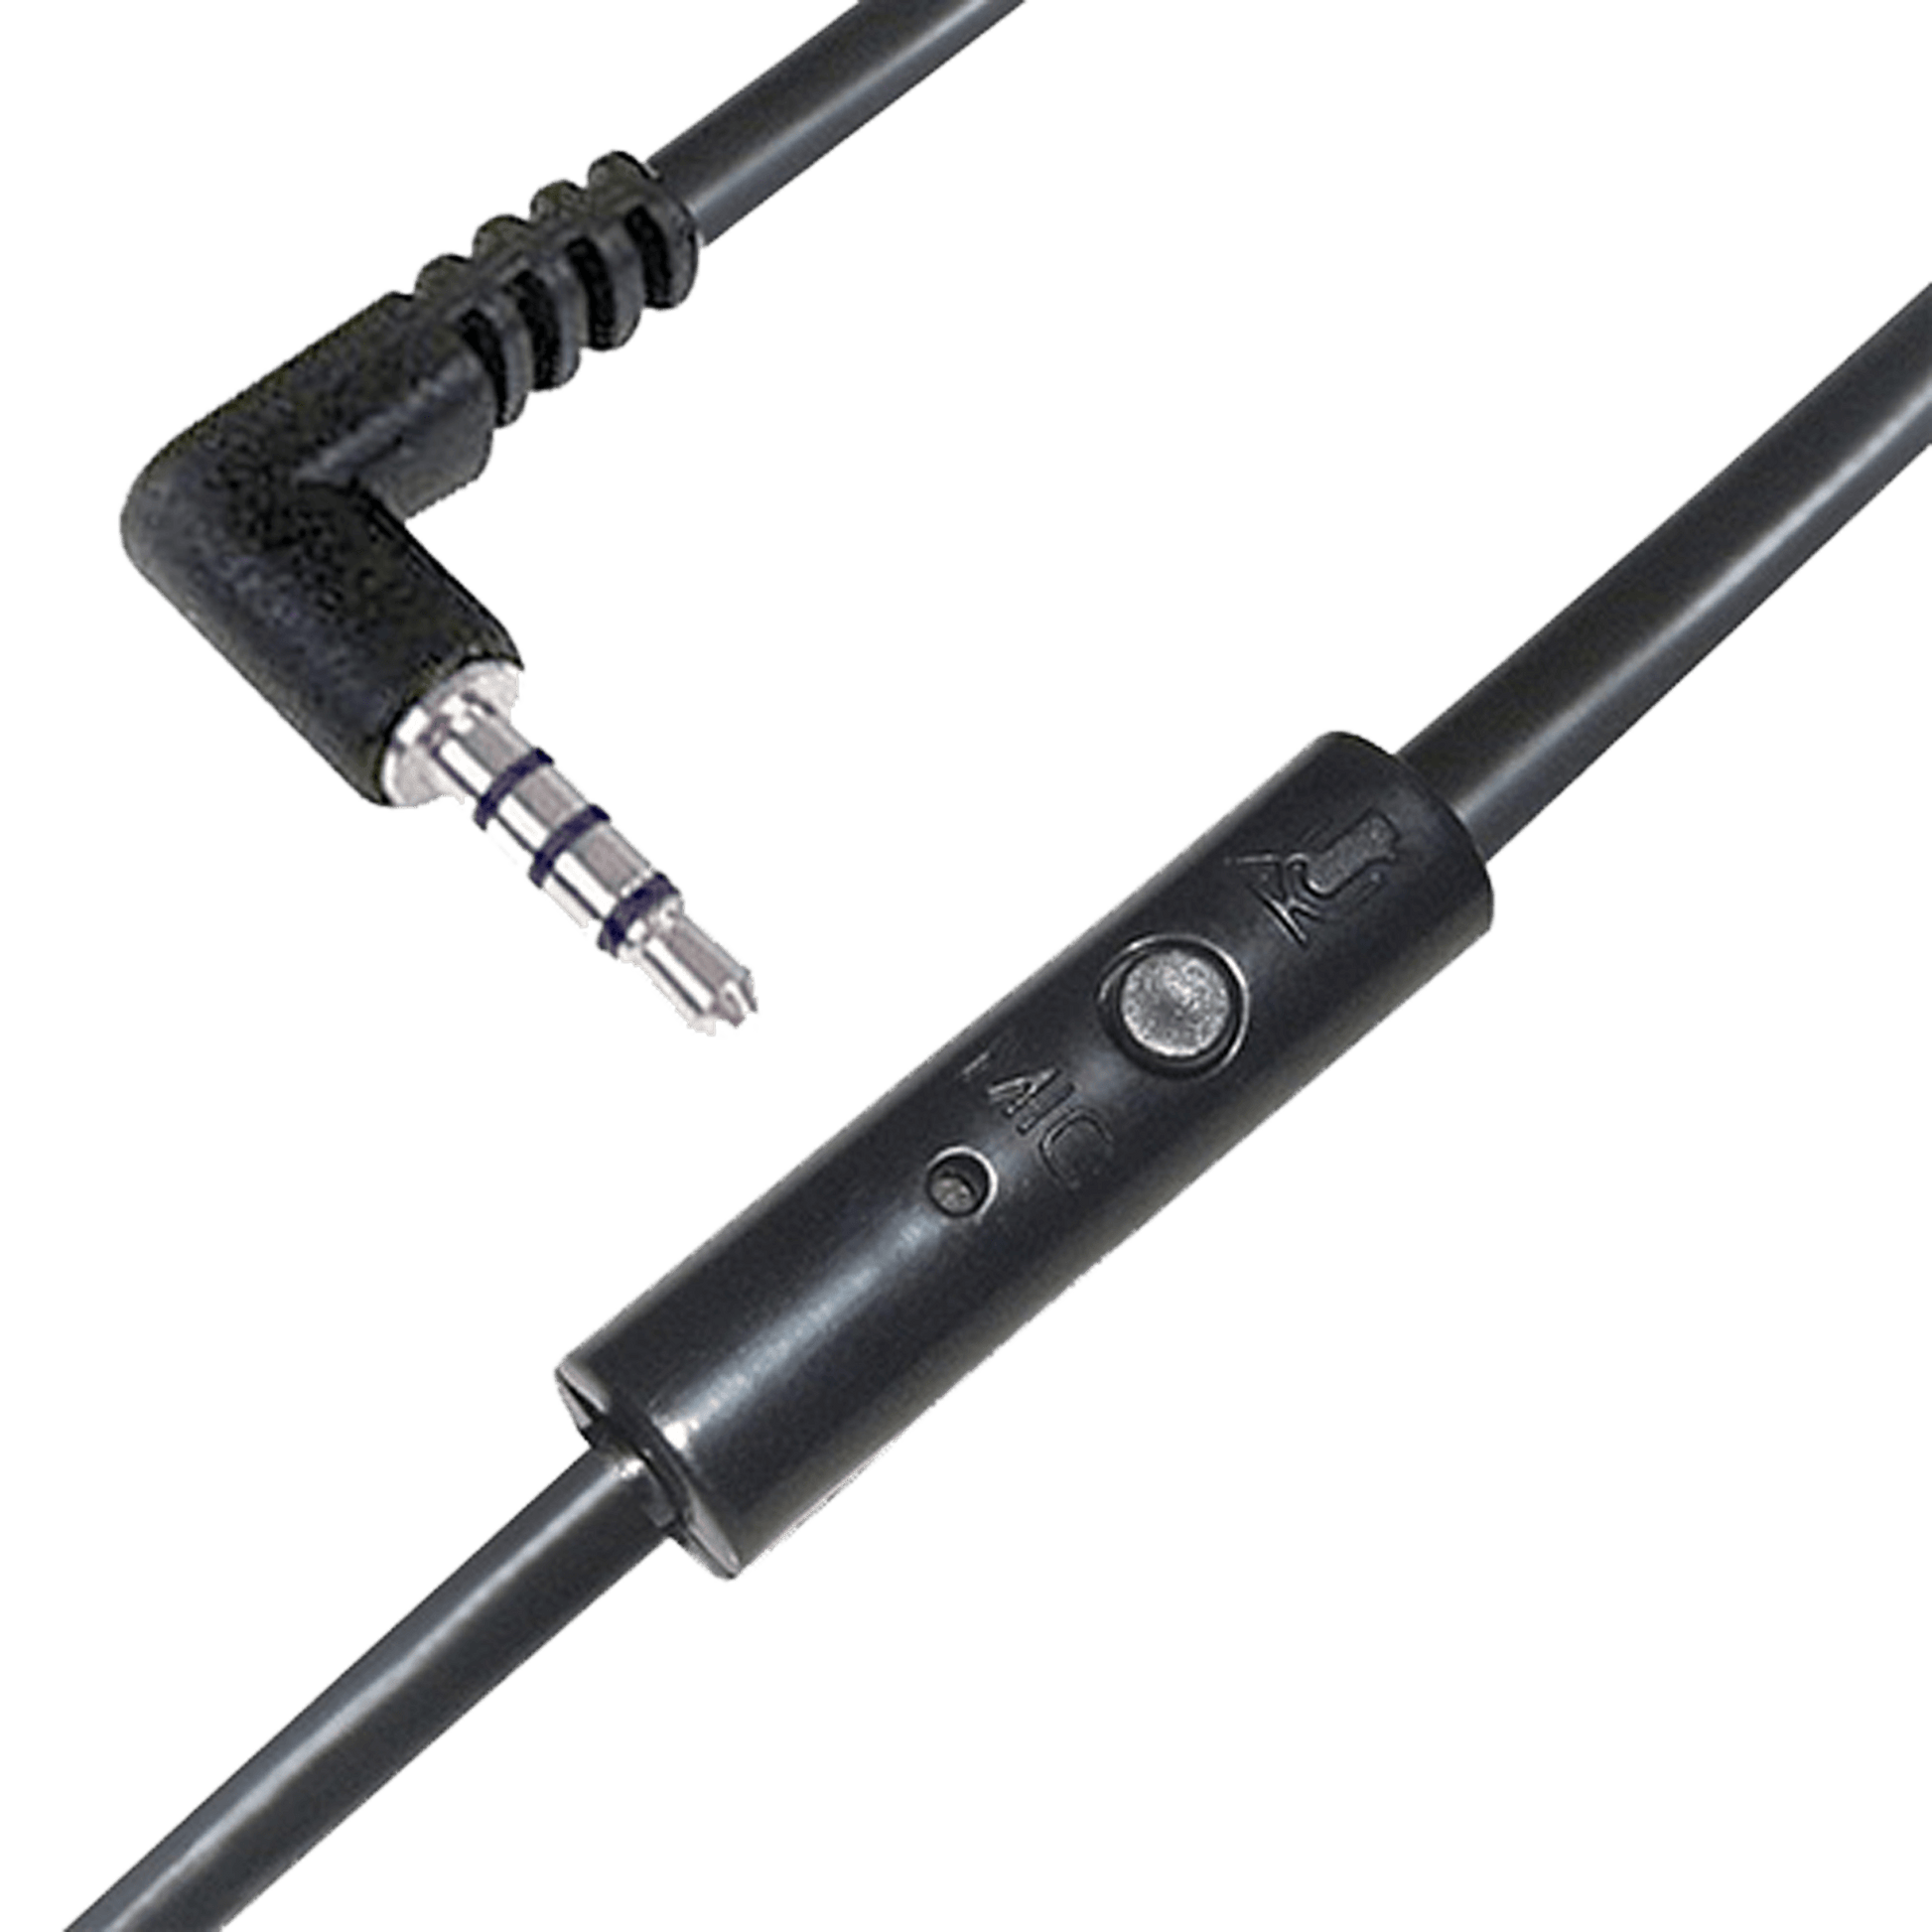 mic and right angled jack connection